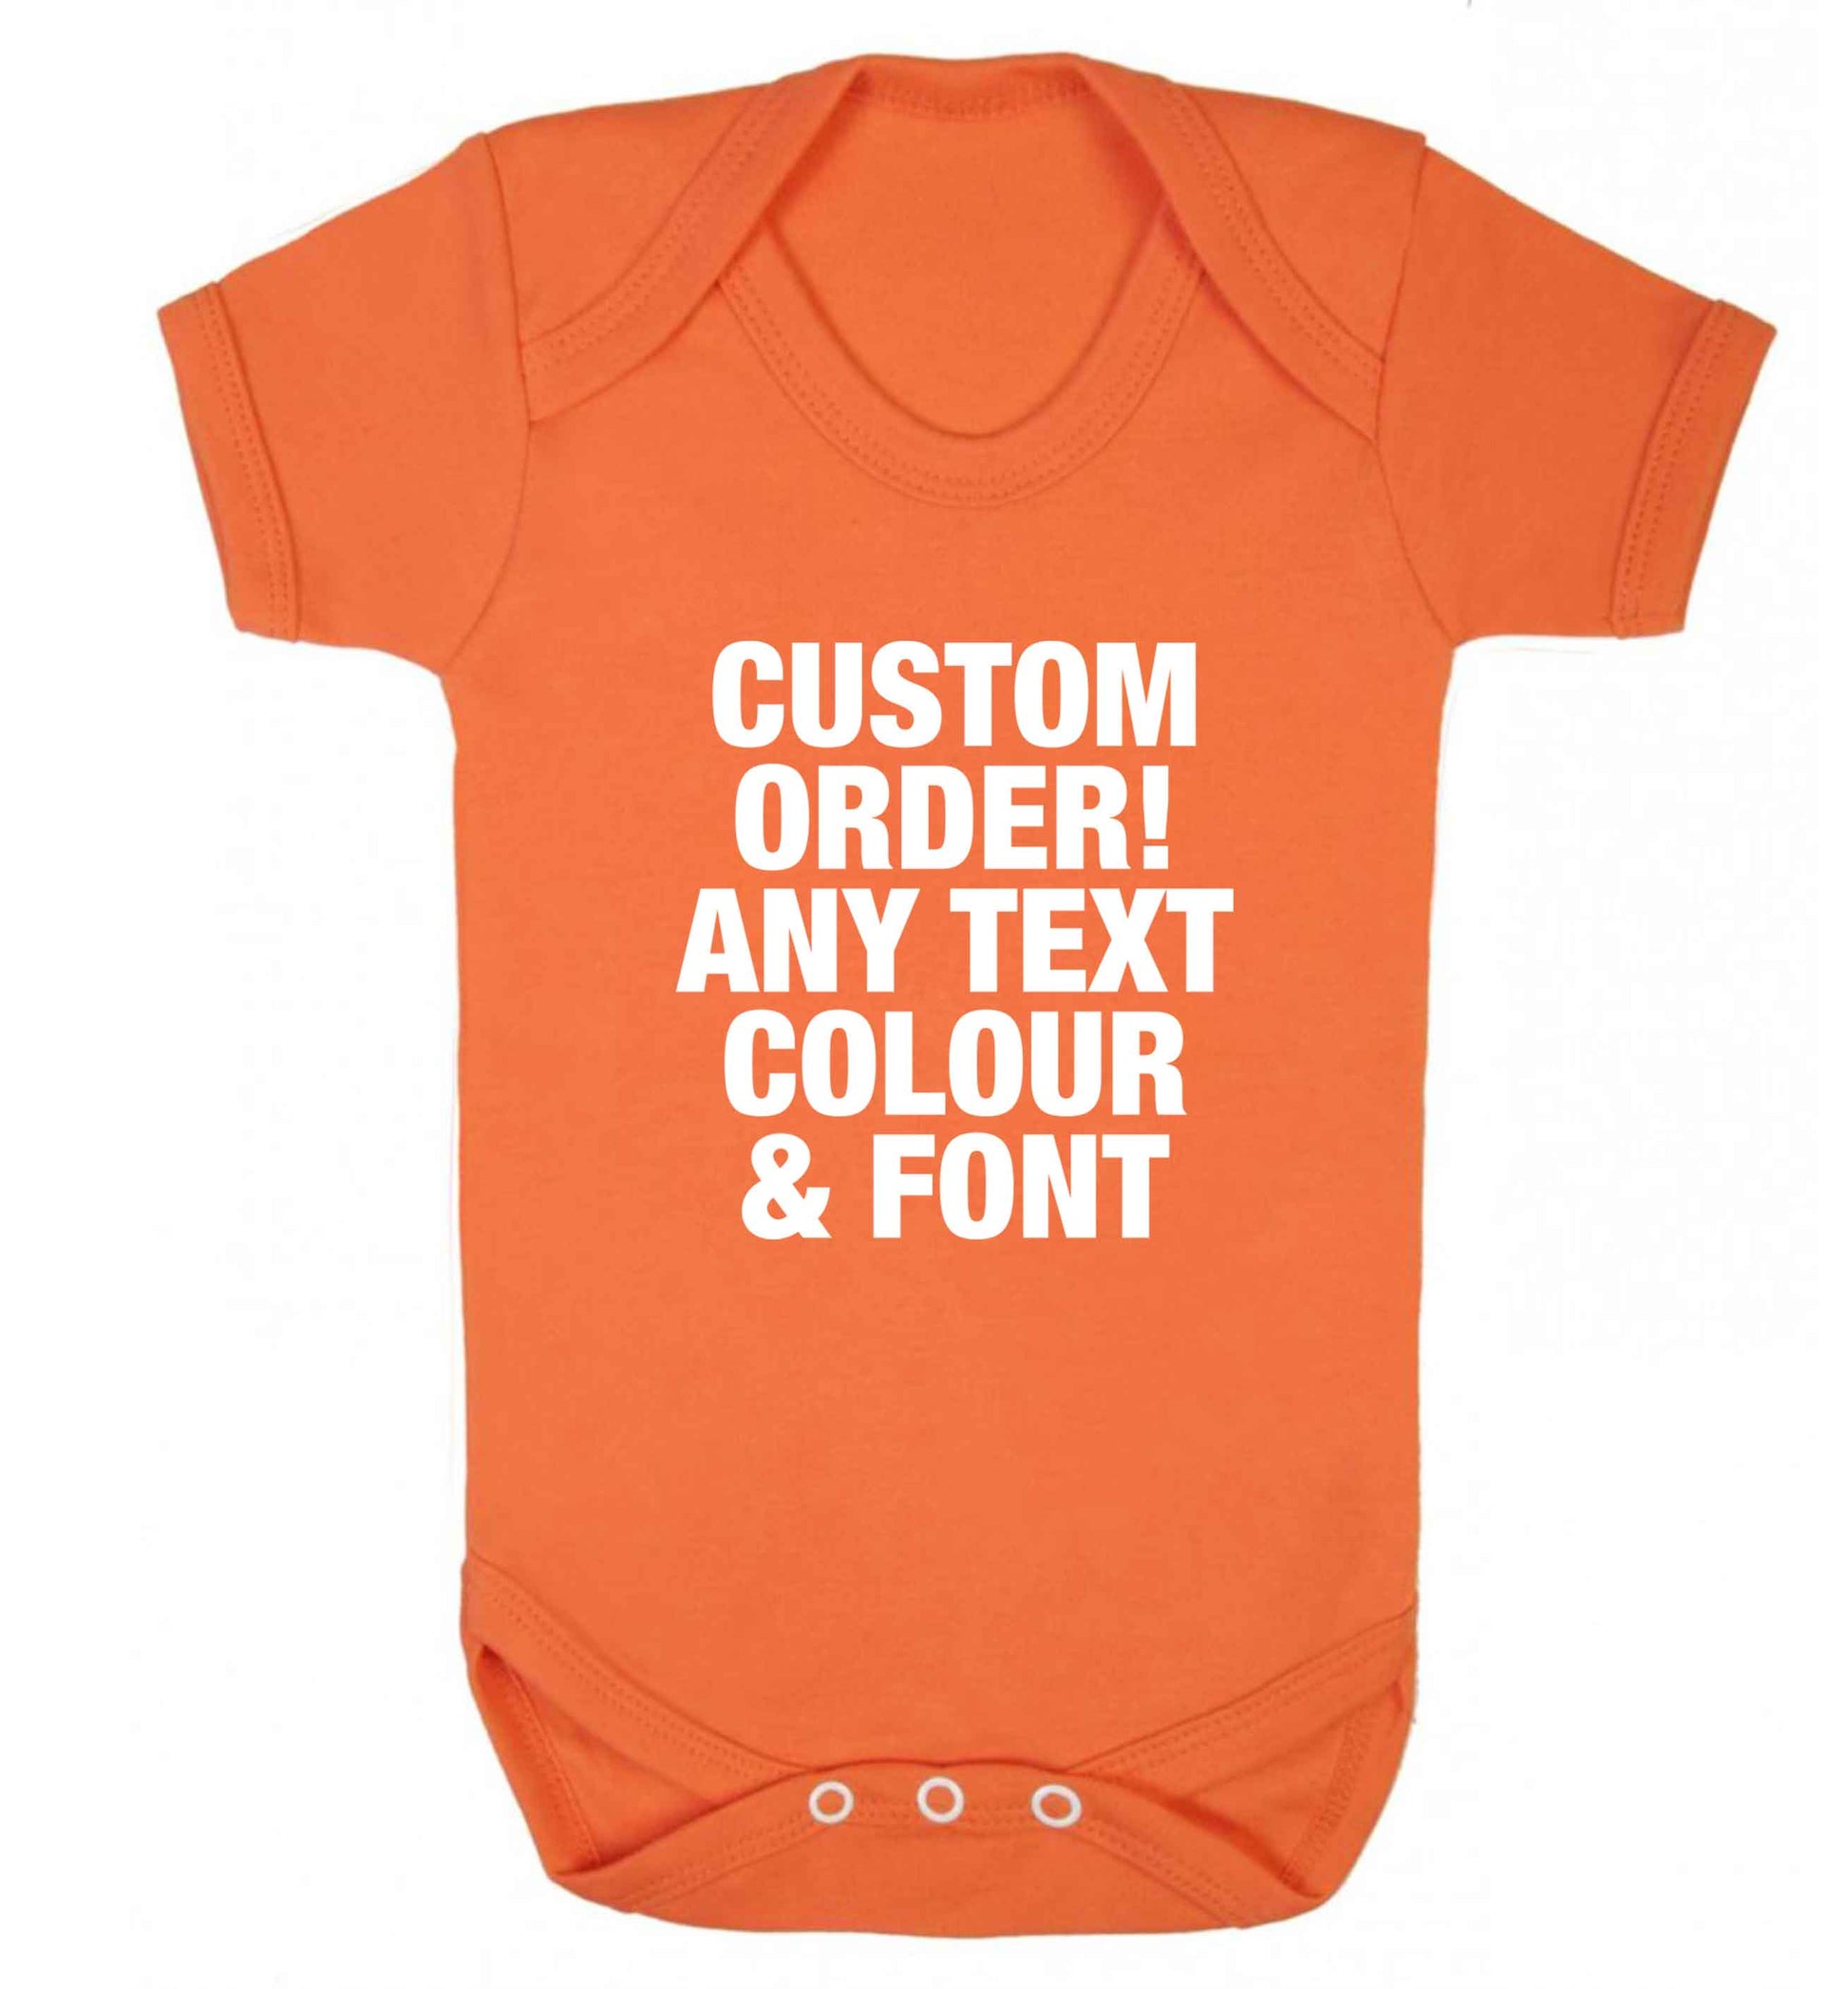 Custom order any text colour and font baby vest orange 18-24 months